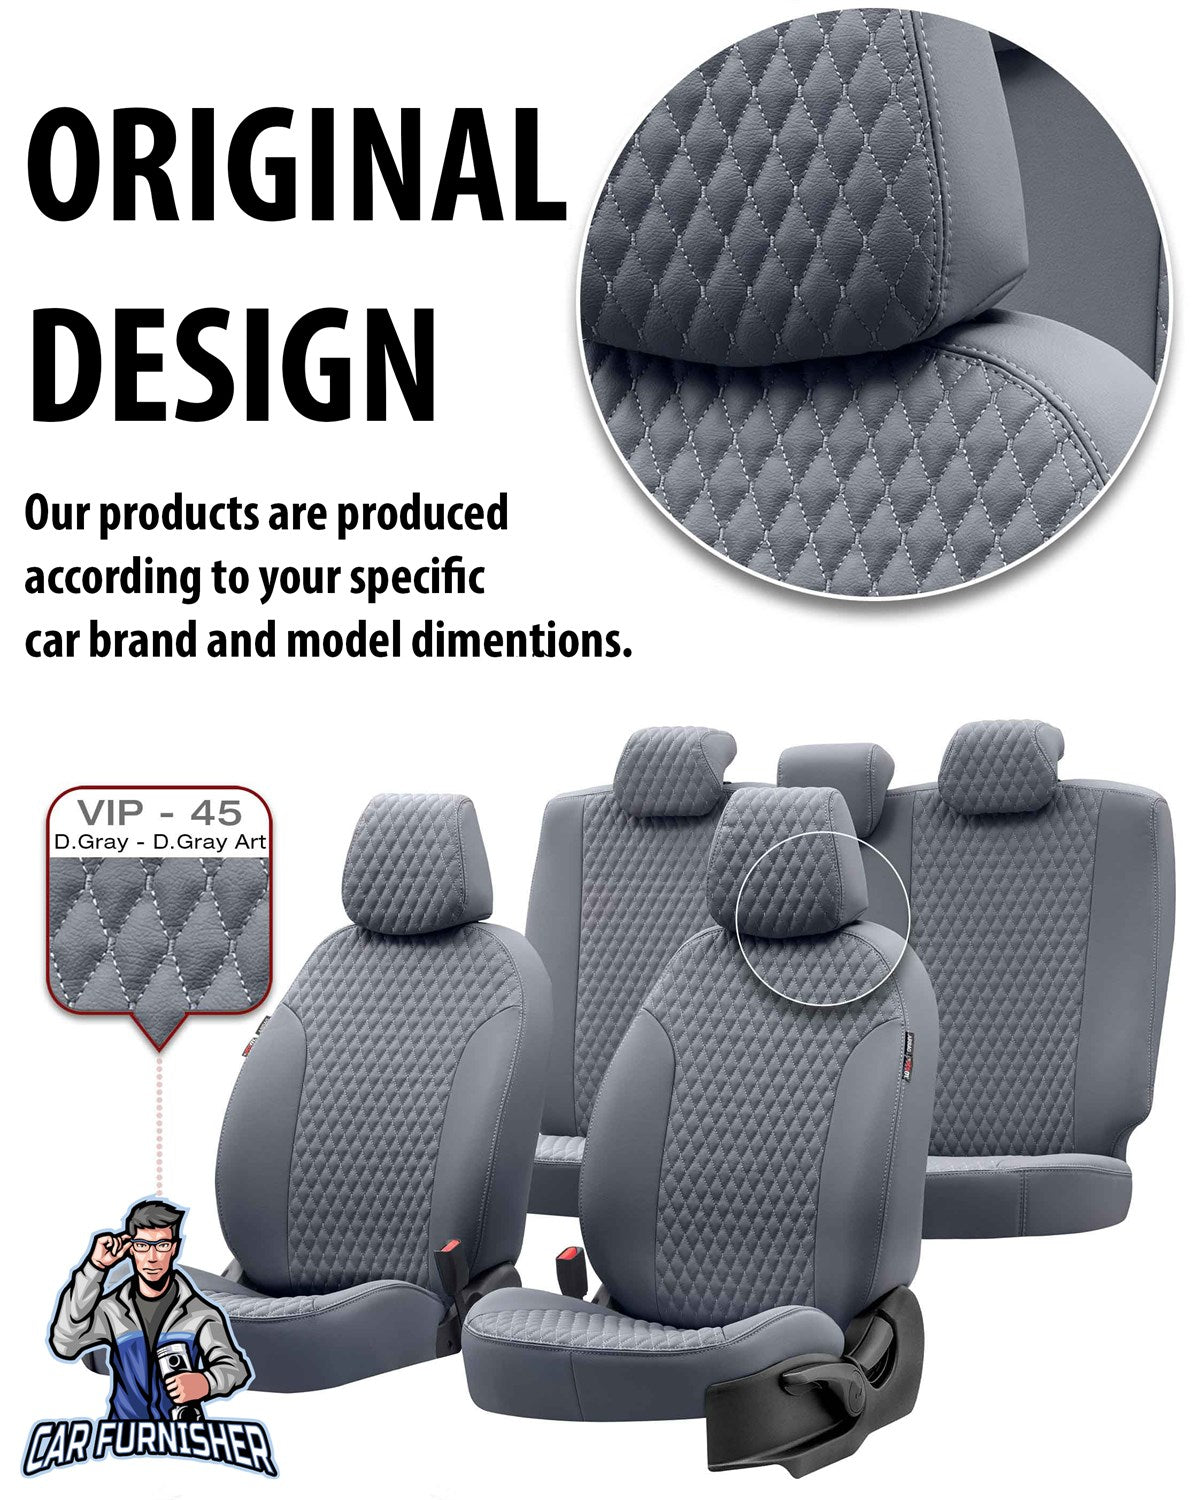 Volkswagen Amarok Seat Cover Amsterdam Leather Design Smoked Black Leather